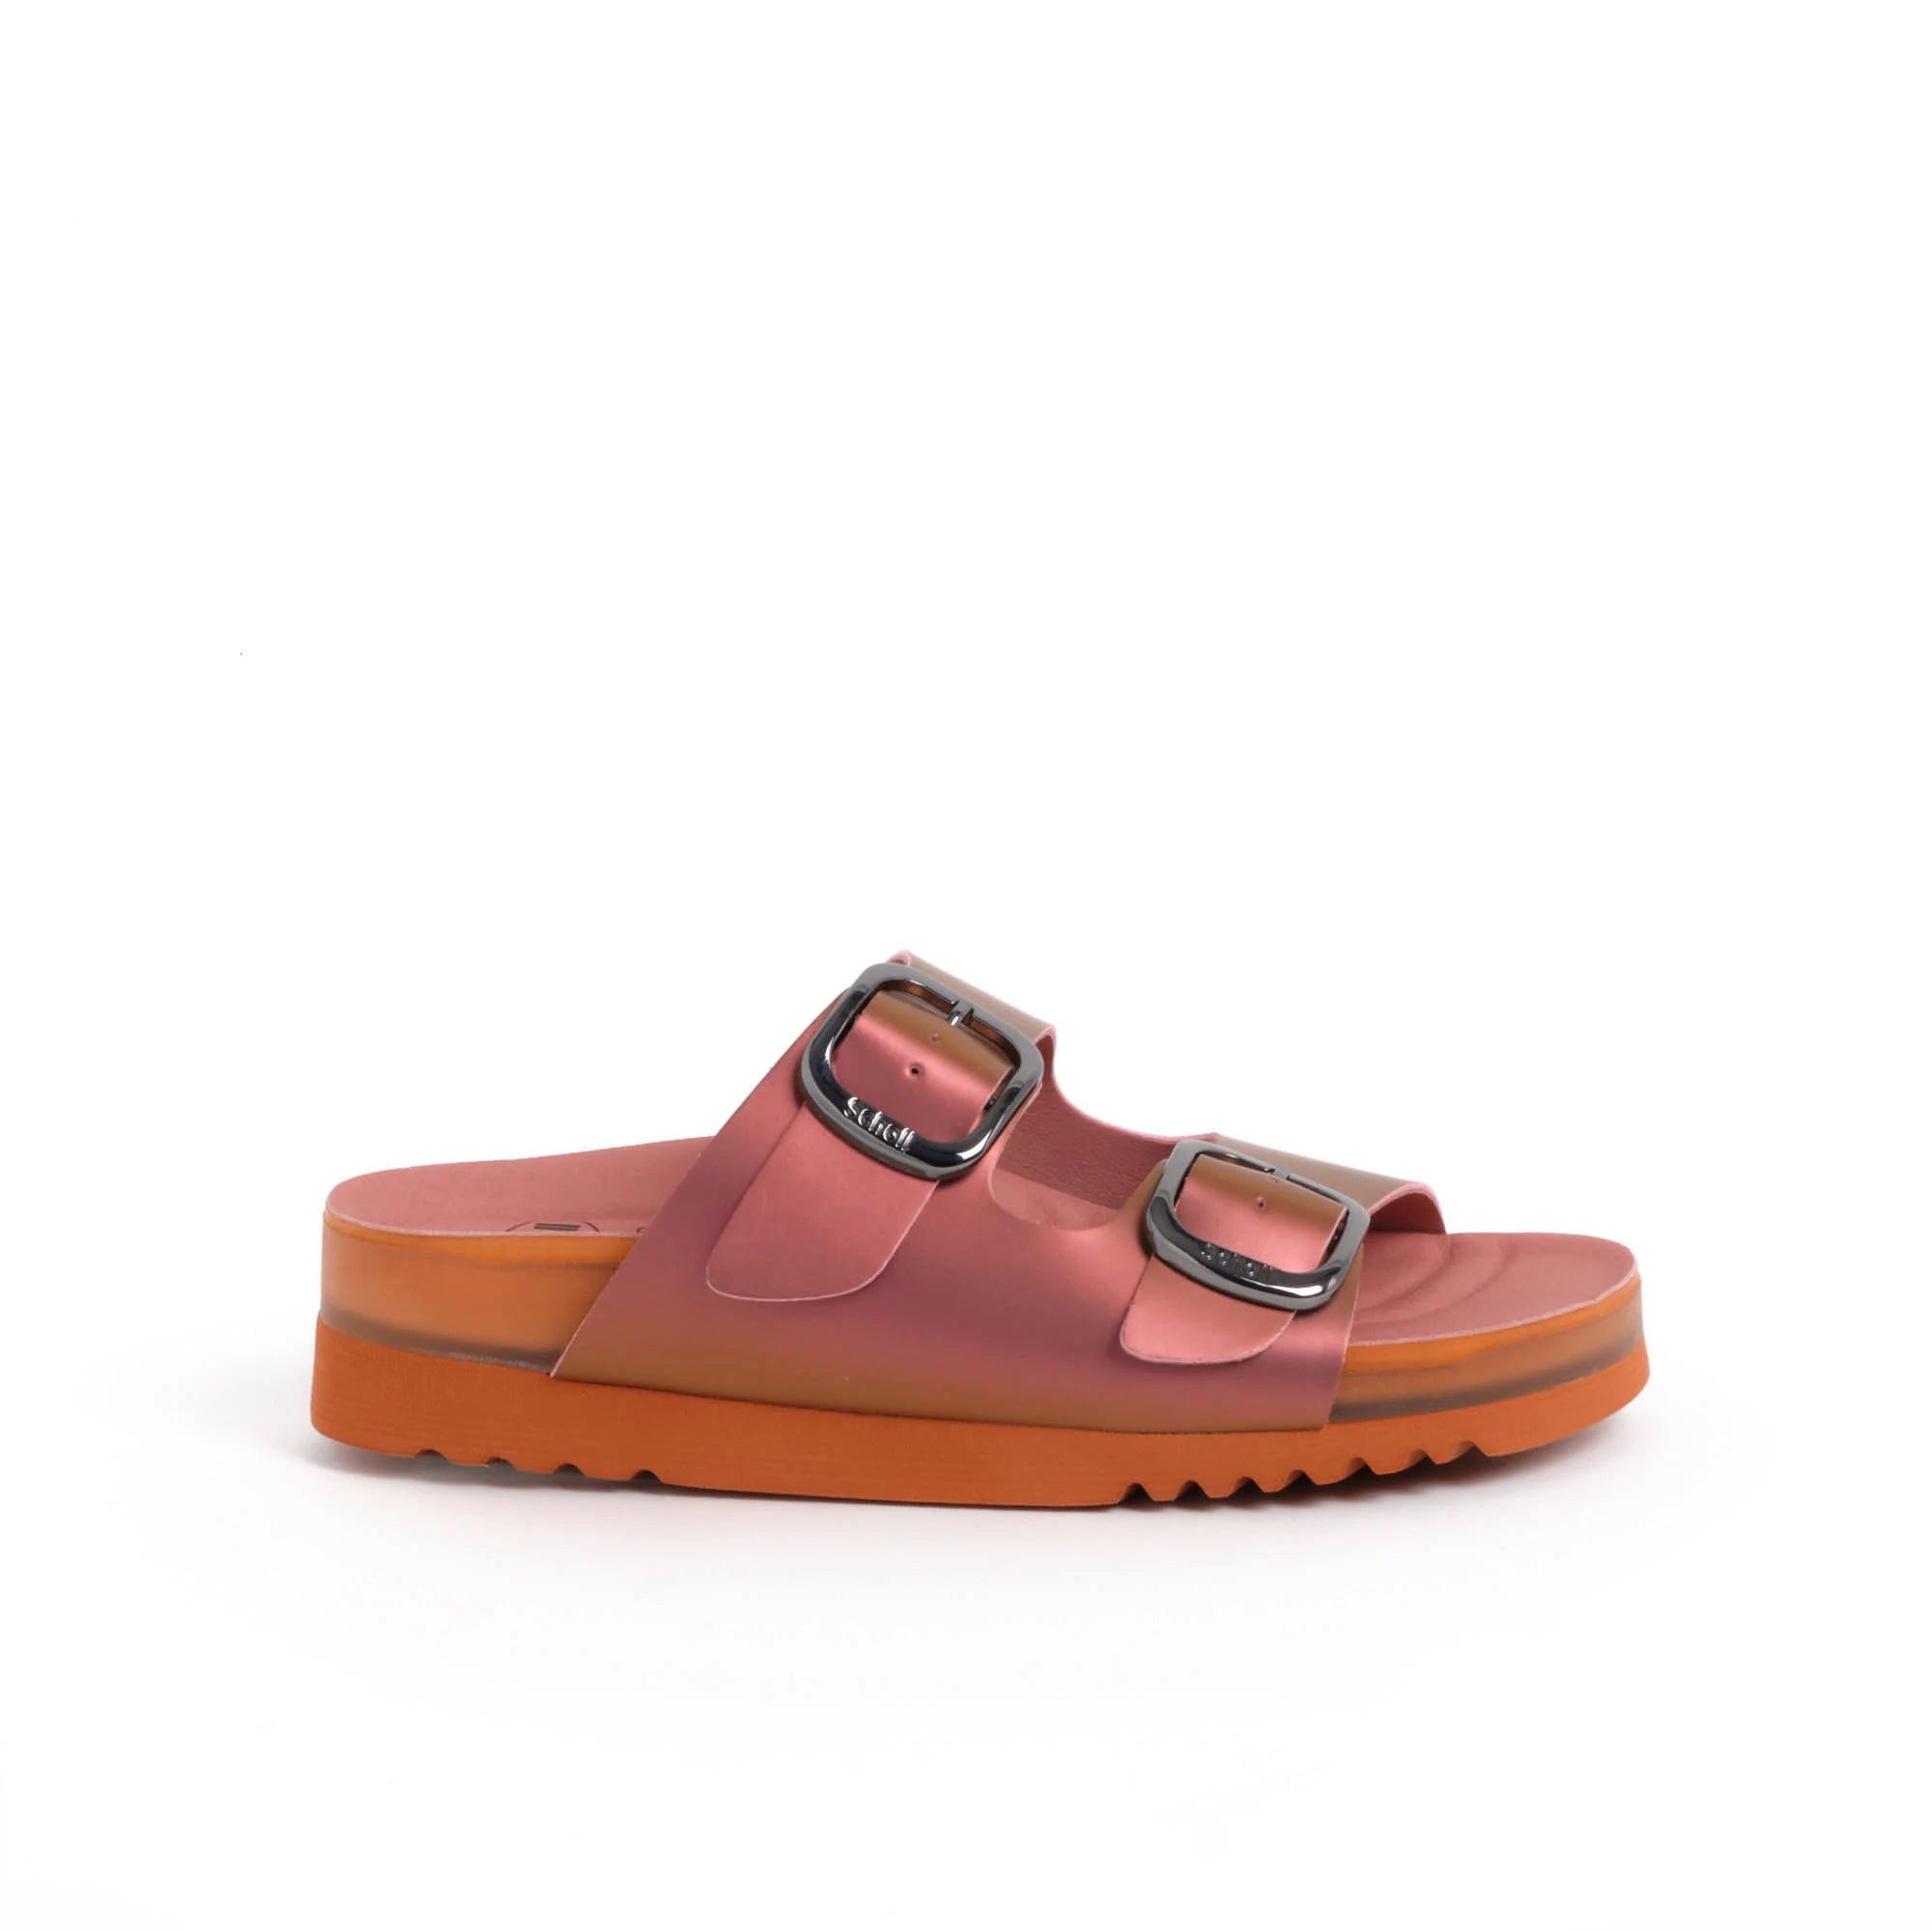 Vally Mules Synthetic Iridescent Orange N. 39 - Vally Mules Synthetic Iridescent Orange N. 39